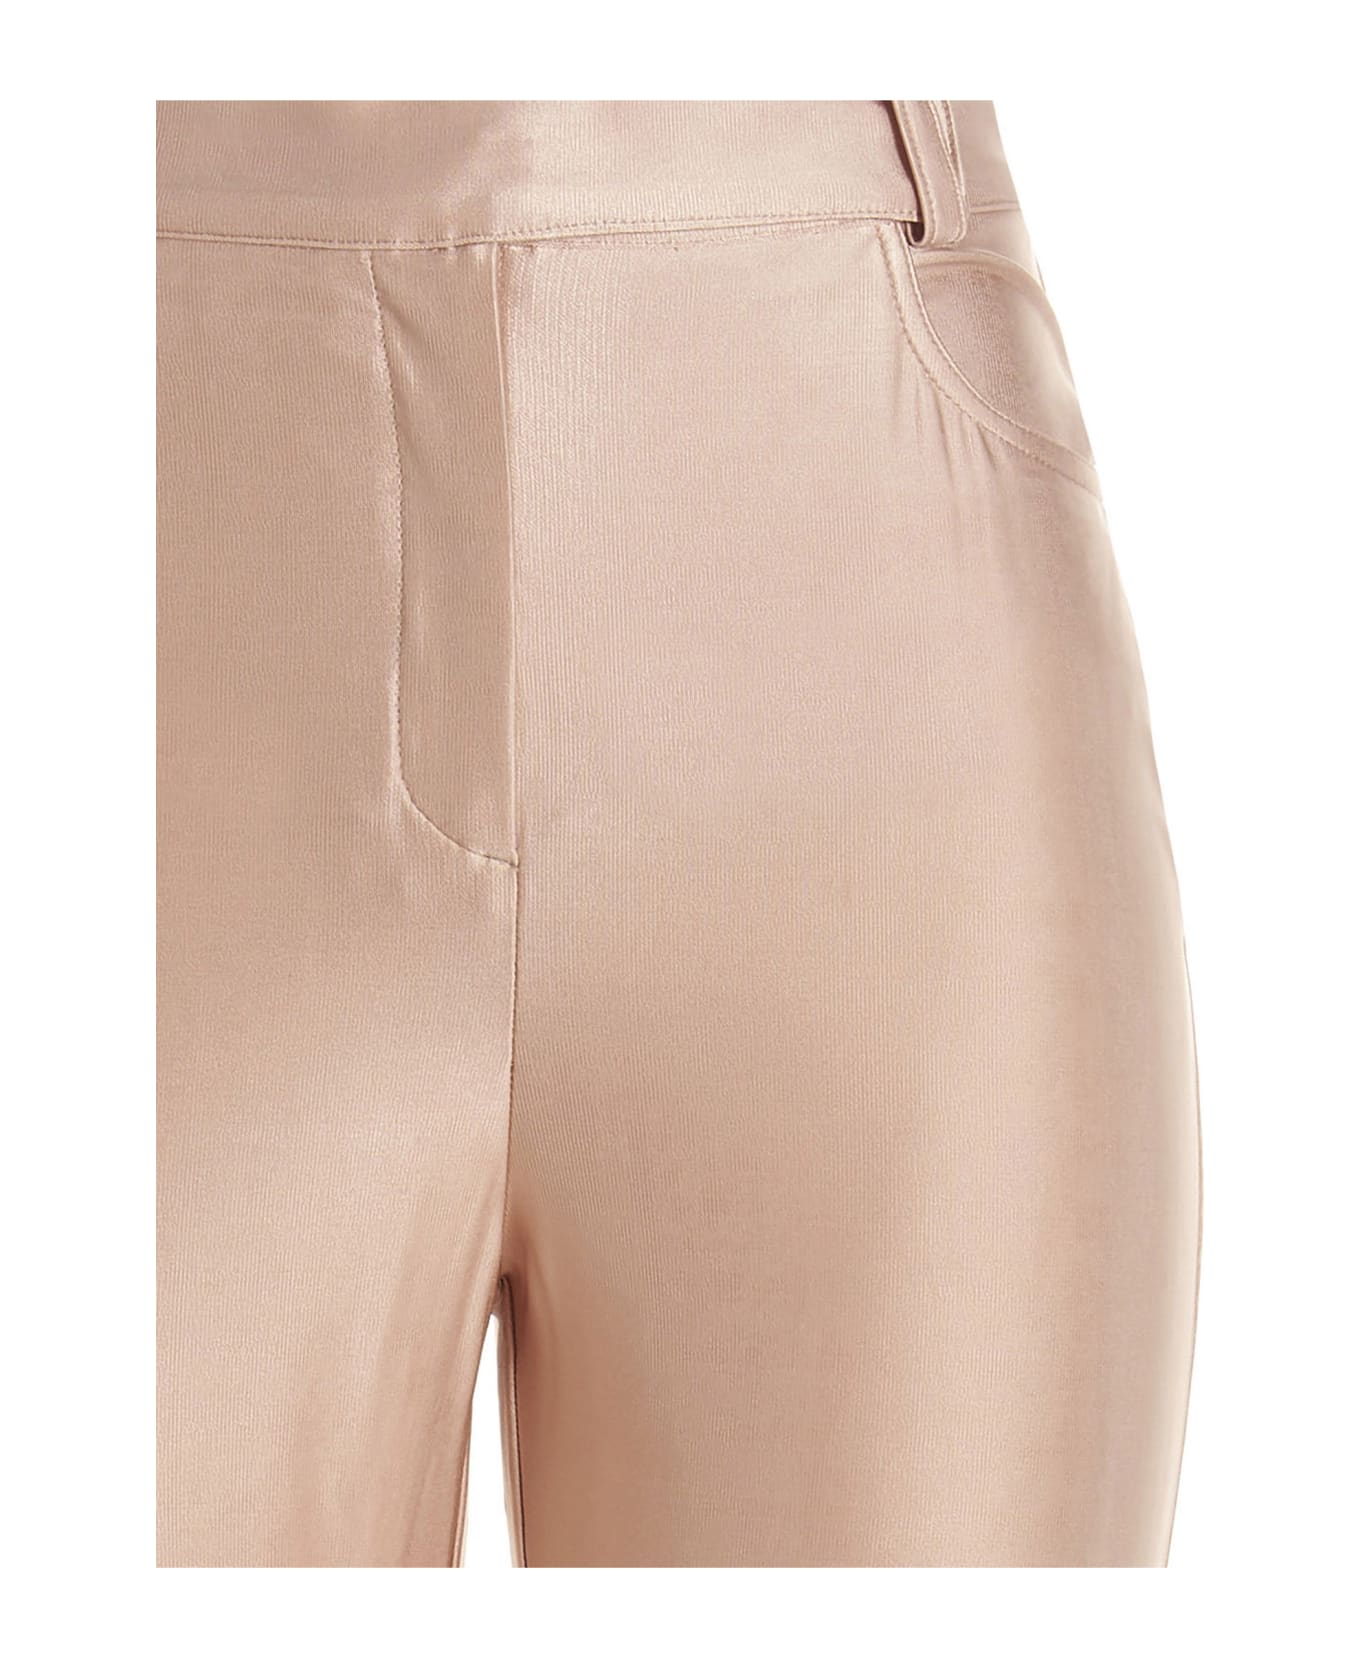 Alexandre Vauthier Shiny Stretch Pants - Pink ボトムス